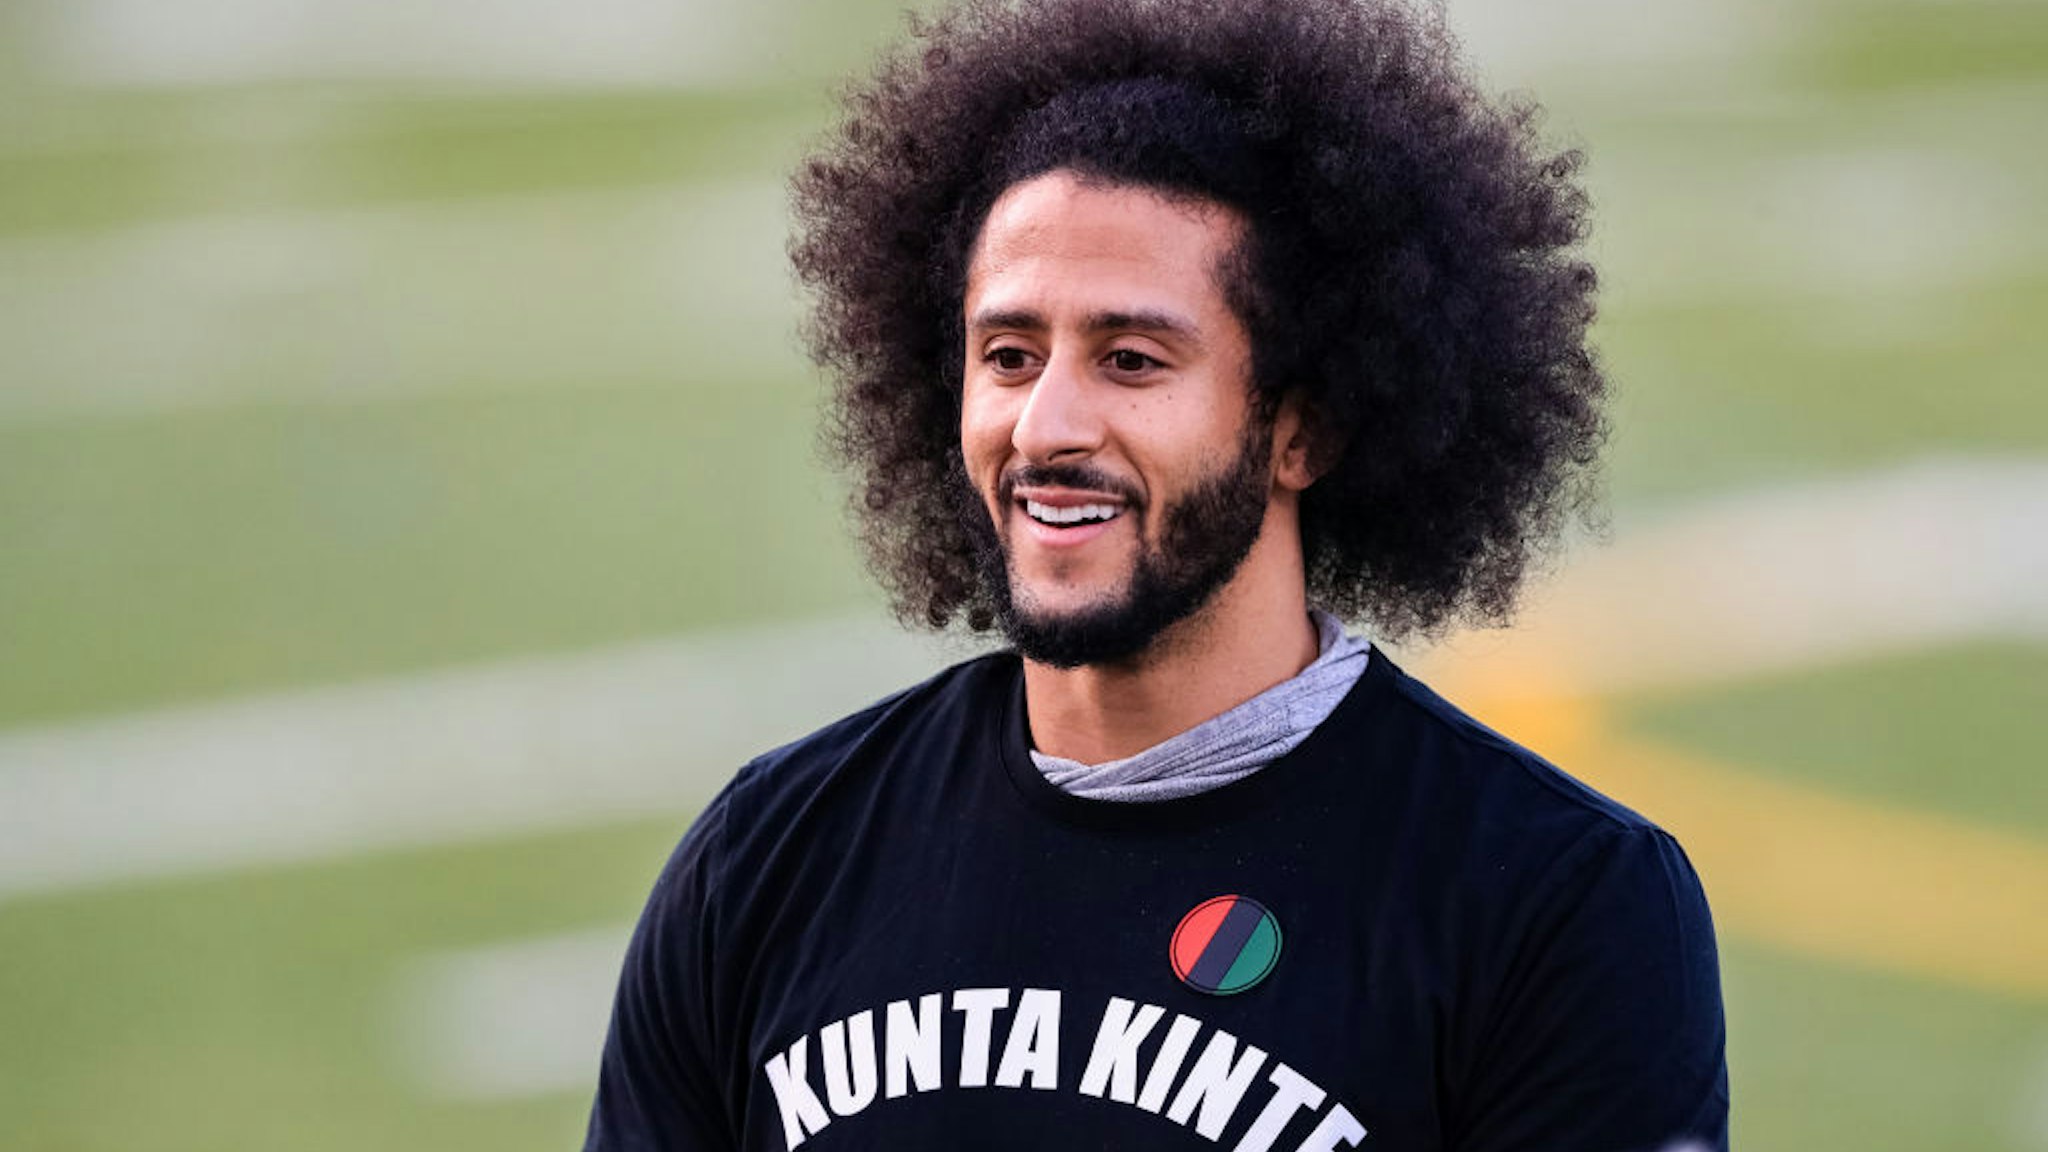 RIVERDALE, GA - NOVEMBER 16: Colin Kaepernick looks on during his NFL workout held at Charles R Drew high school on November 16, 2019 in Riverdale, Georgia. (Photo by Carmen Mandato/Getty Images)